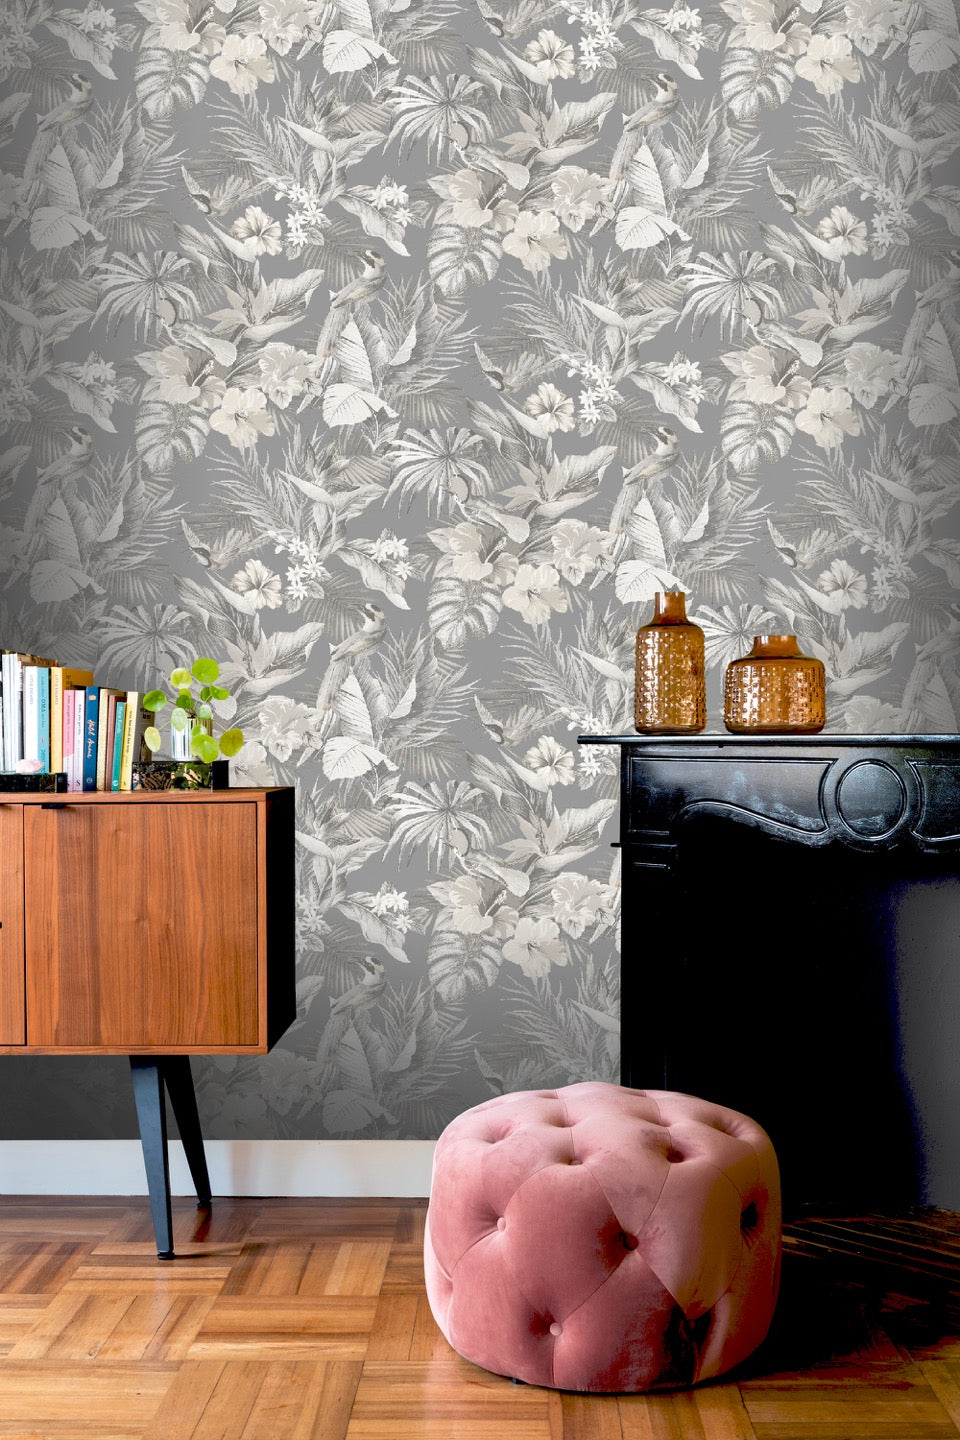 vh53900073r Beautiful deep engraved tropical paradise design with gorgeous colourful leaves, flowers and birds on a black background. Heavy weight Italian textured vinyl. Supreme quality